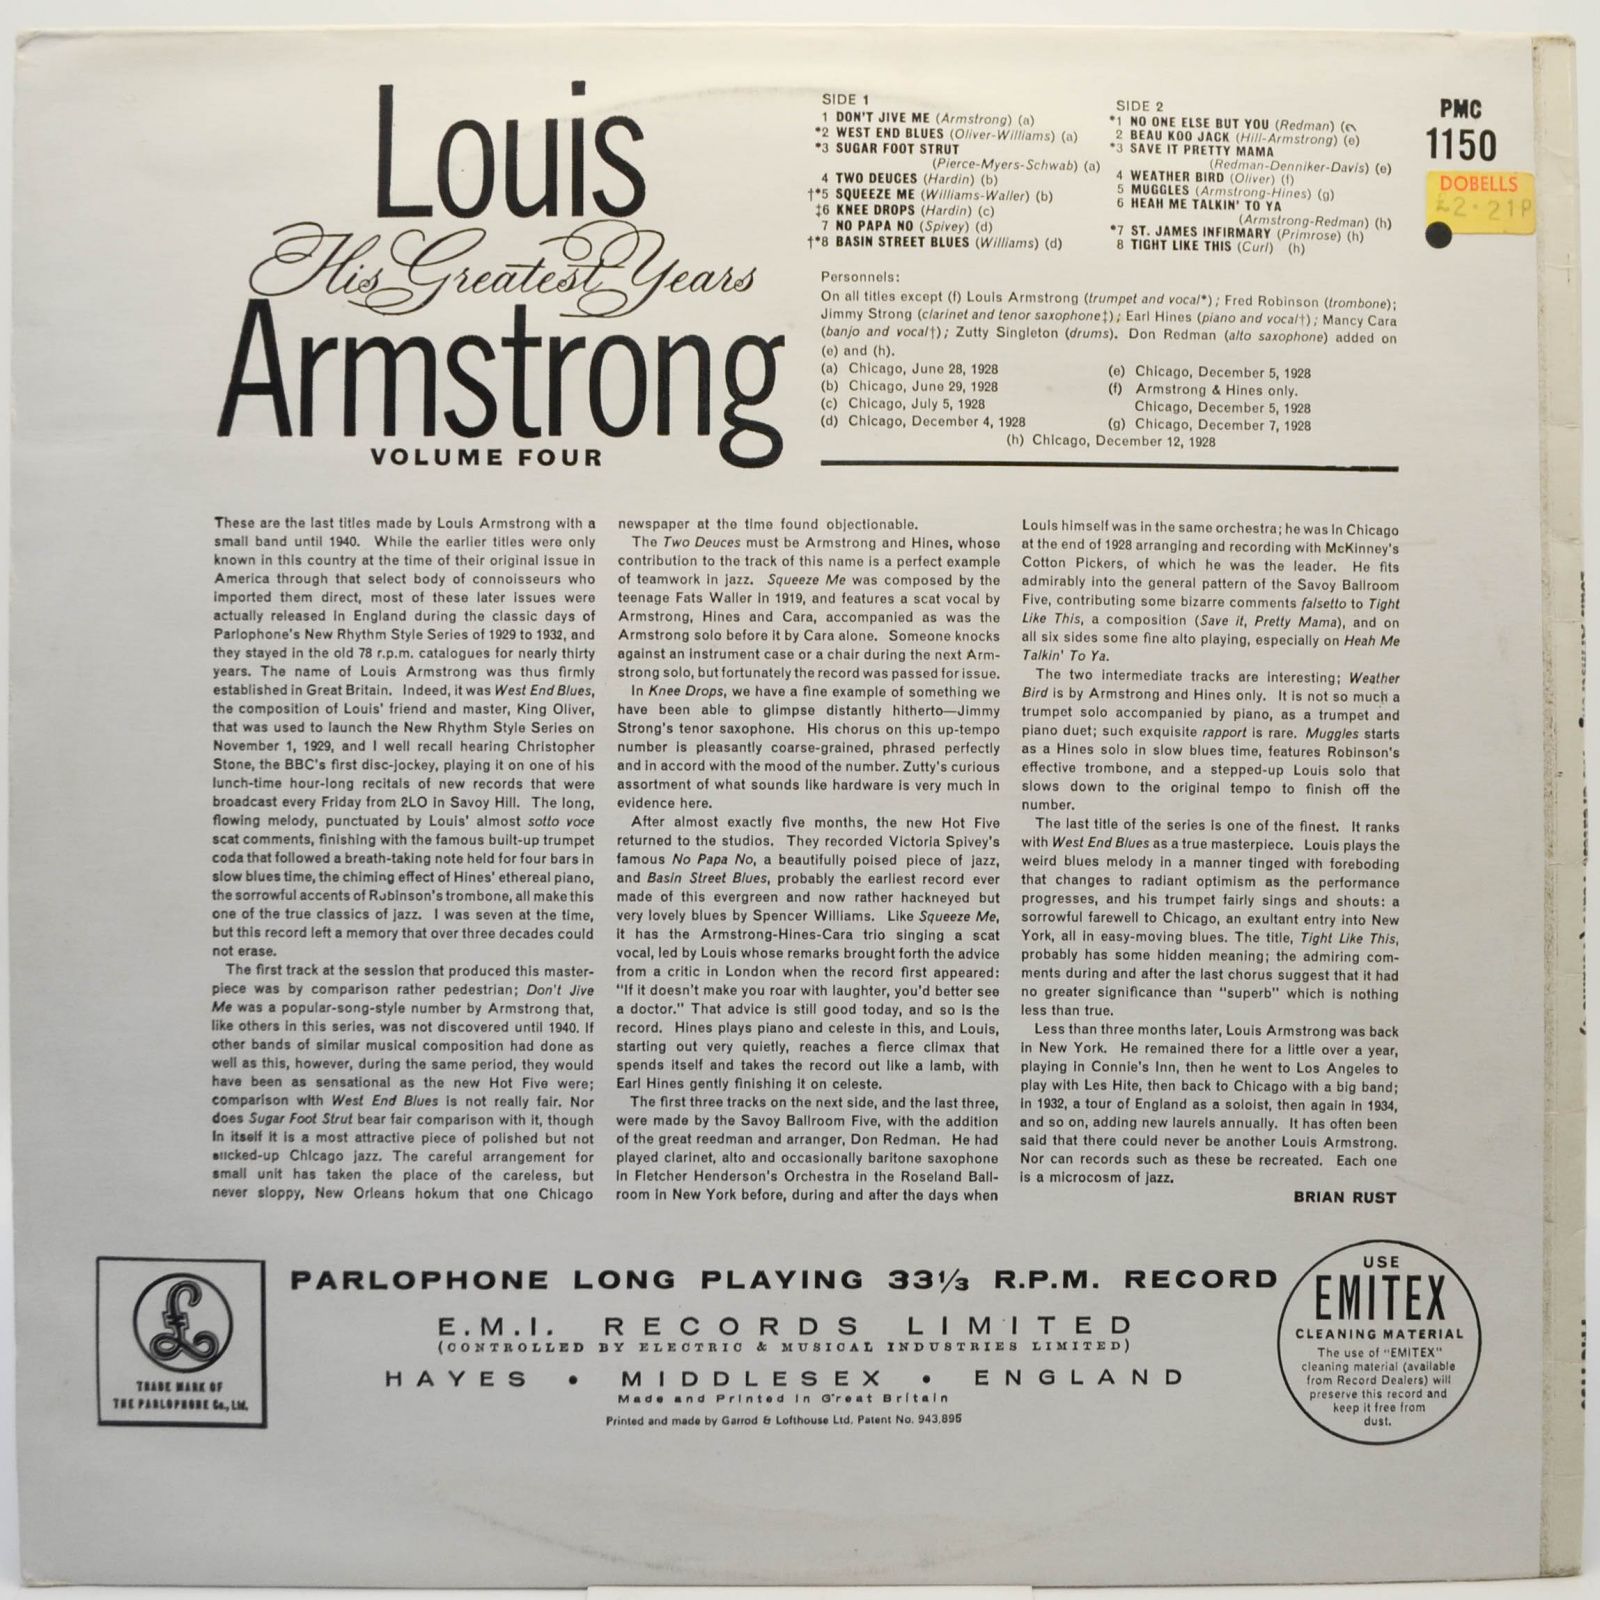 Louis Armstrong — His Greatest Years - Volume 4 (UK), 1961